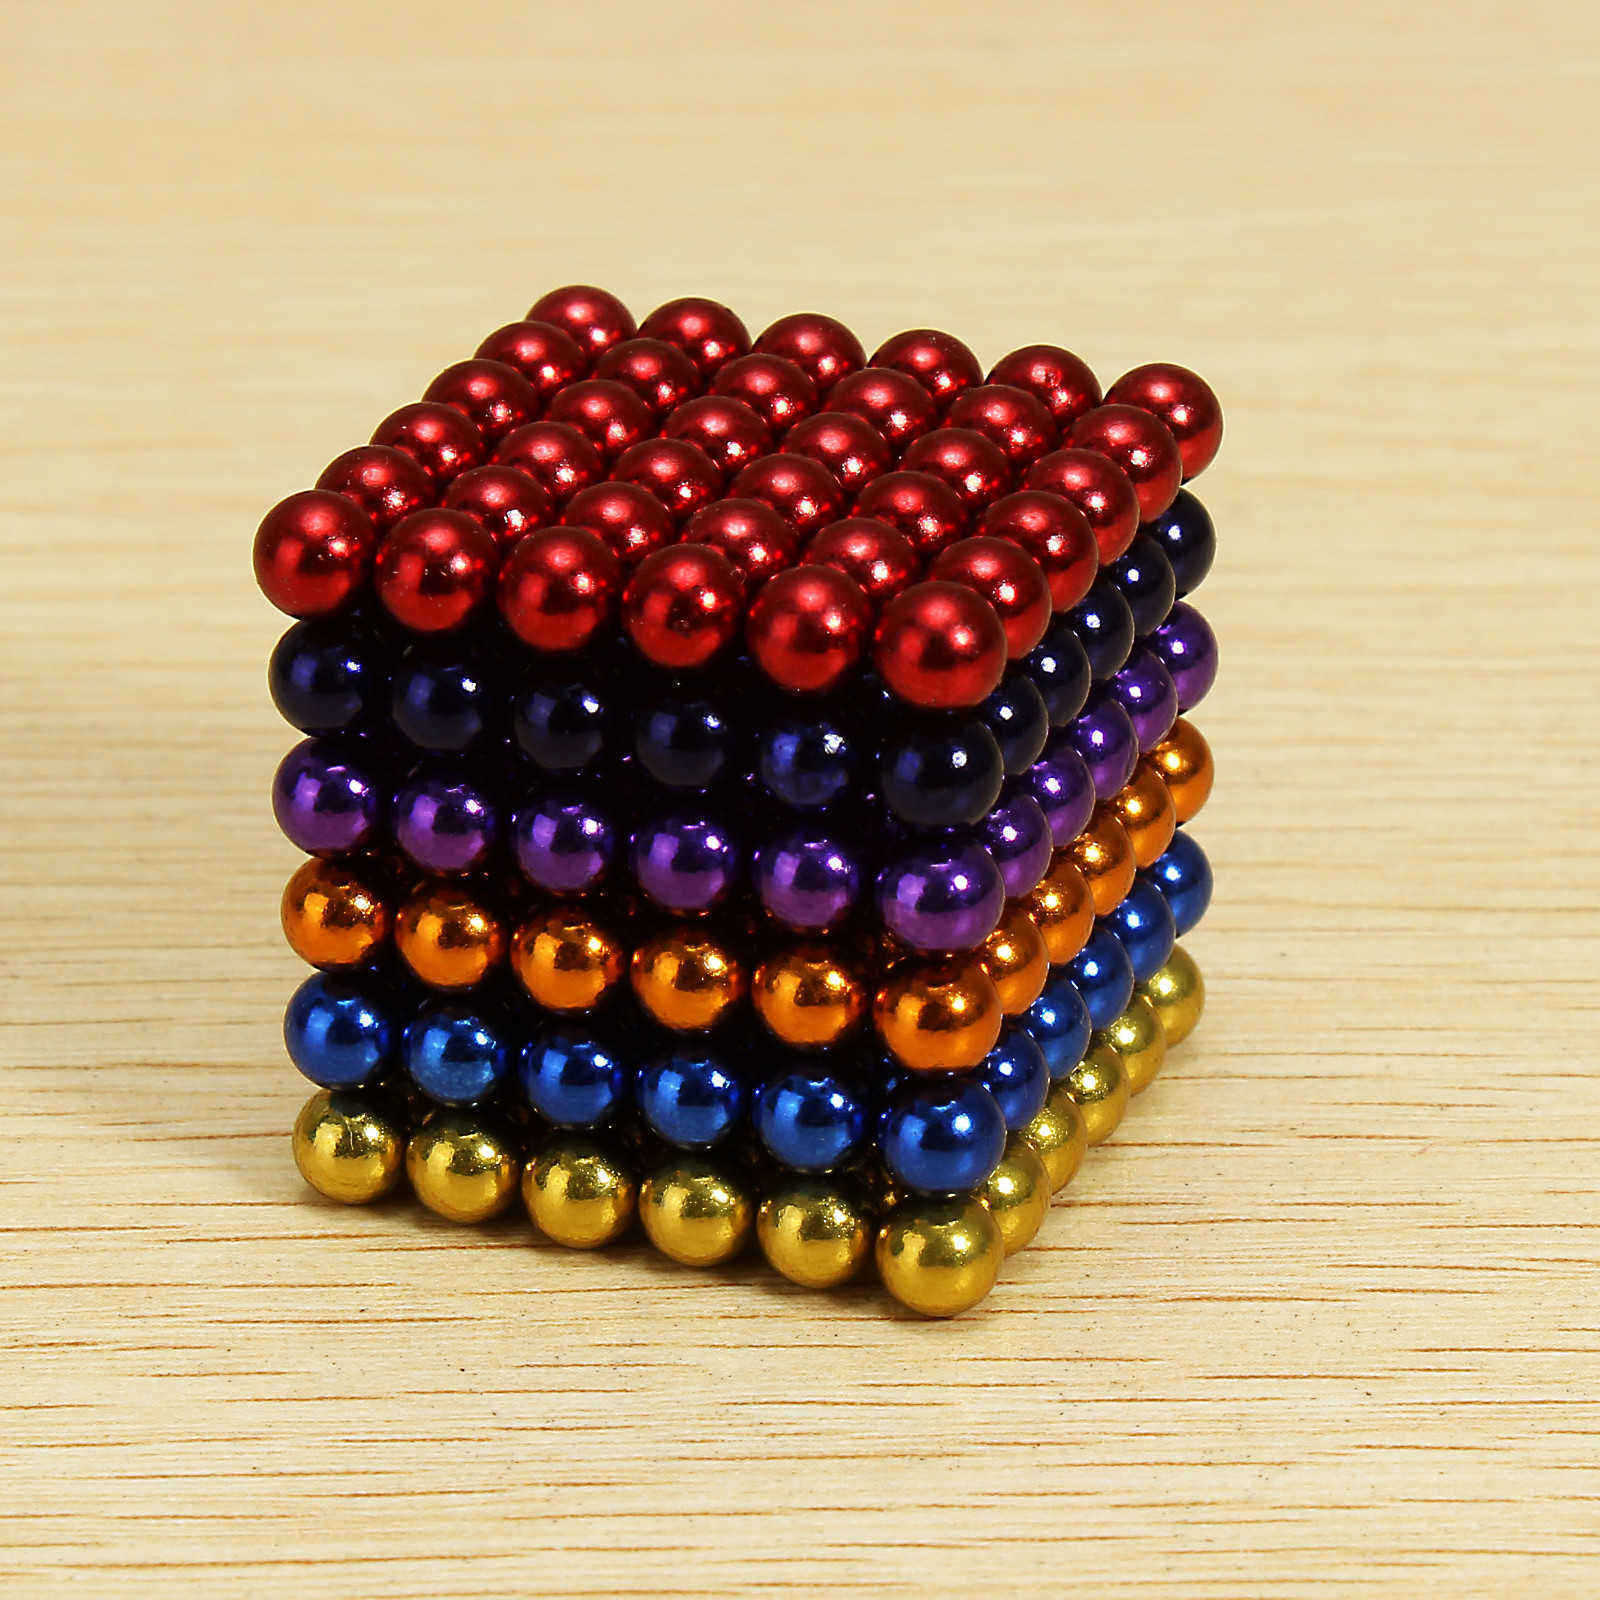 216Pcs-5mm-Colorful-DIY-Neo-Magnet-Cube-Magic-Beads-Balls-Puzzle-Magnetic-Toys-1015945